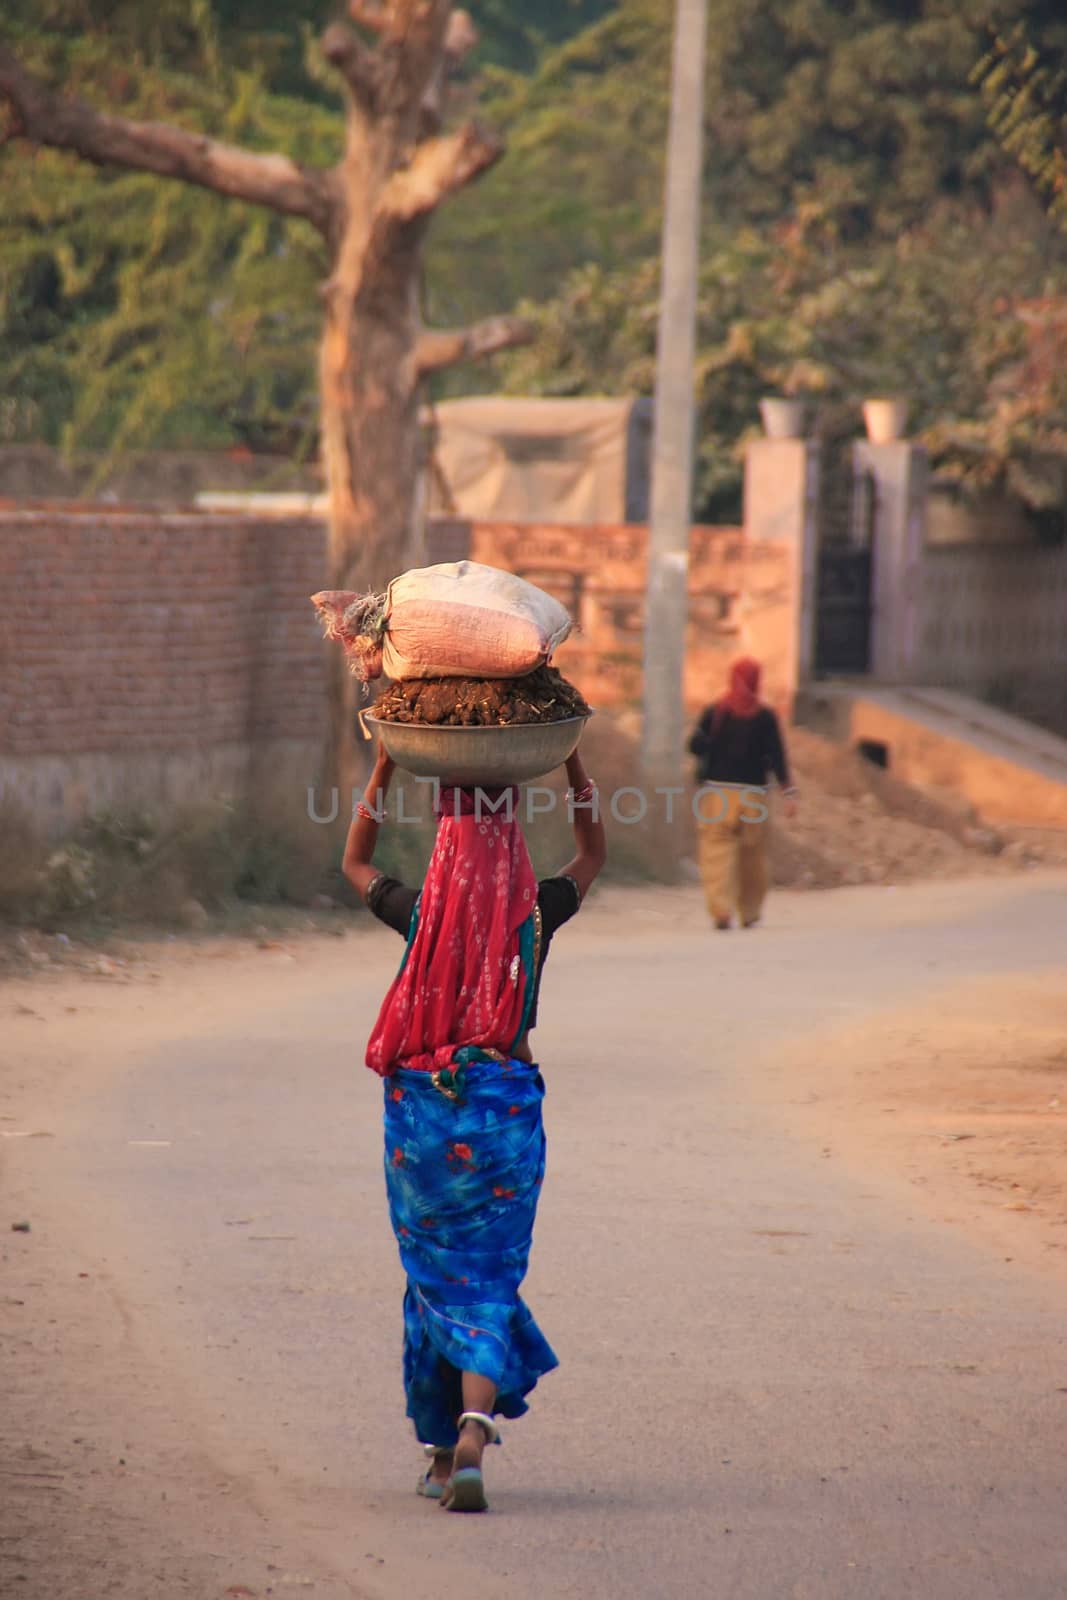 Local woman in traditional dress carrying bundle on her head, Sawai Madhopur, Rajasthan, India